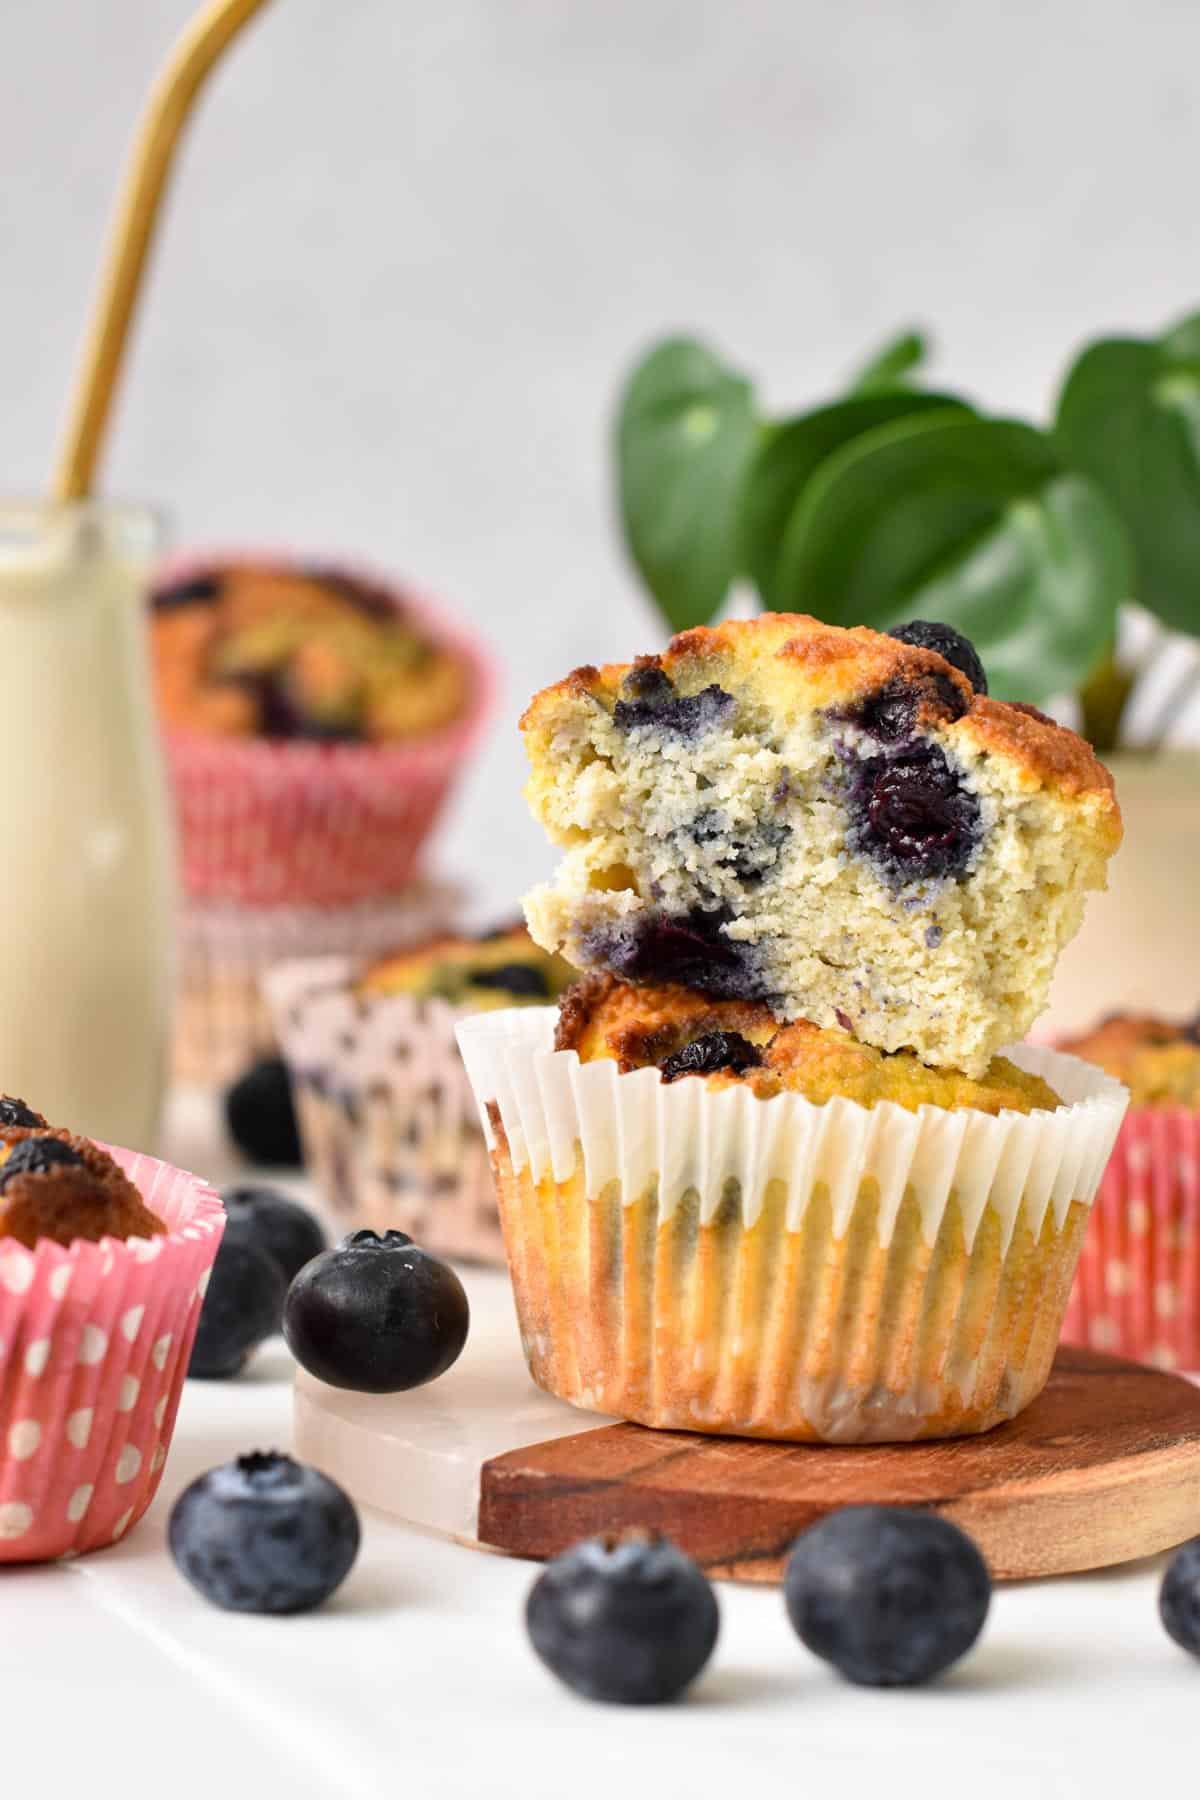 Two coconut flour blueberry muffins stacked together with the one on top half sliced showing the moist, fluffy texture of the muffin.